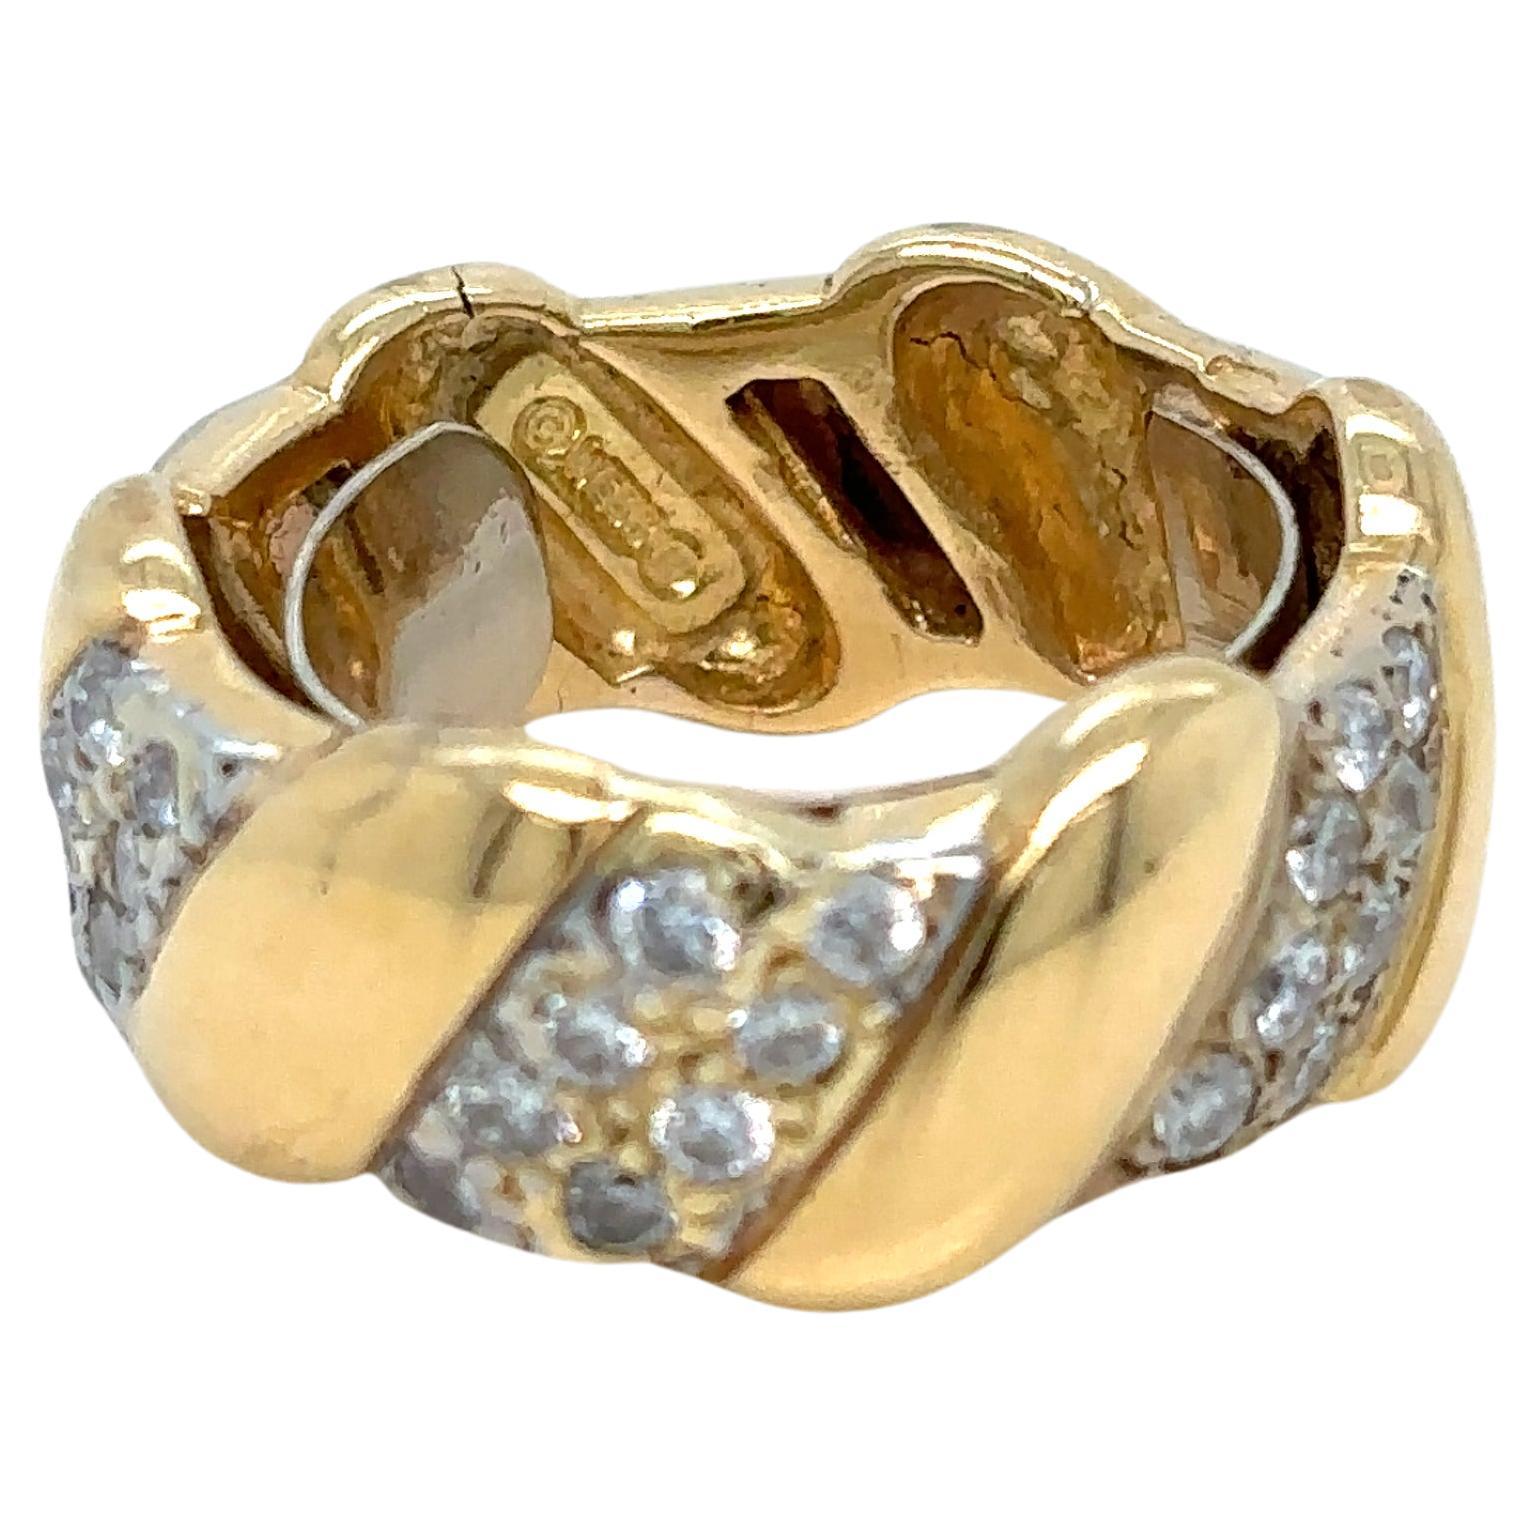 Vintage bold white & yellow gold band by David Webb set with three row of pave diamonds, total 1.20 carats G/H color Vs12. The entire ring is made of 18 karat gold. 

Width: 0,9 cm
Size 5/6

Excellent condition, 100% authenticity guarantee, comes